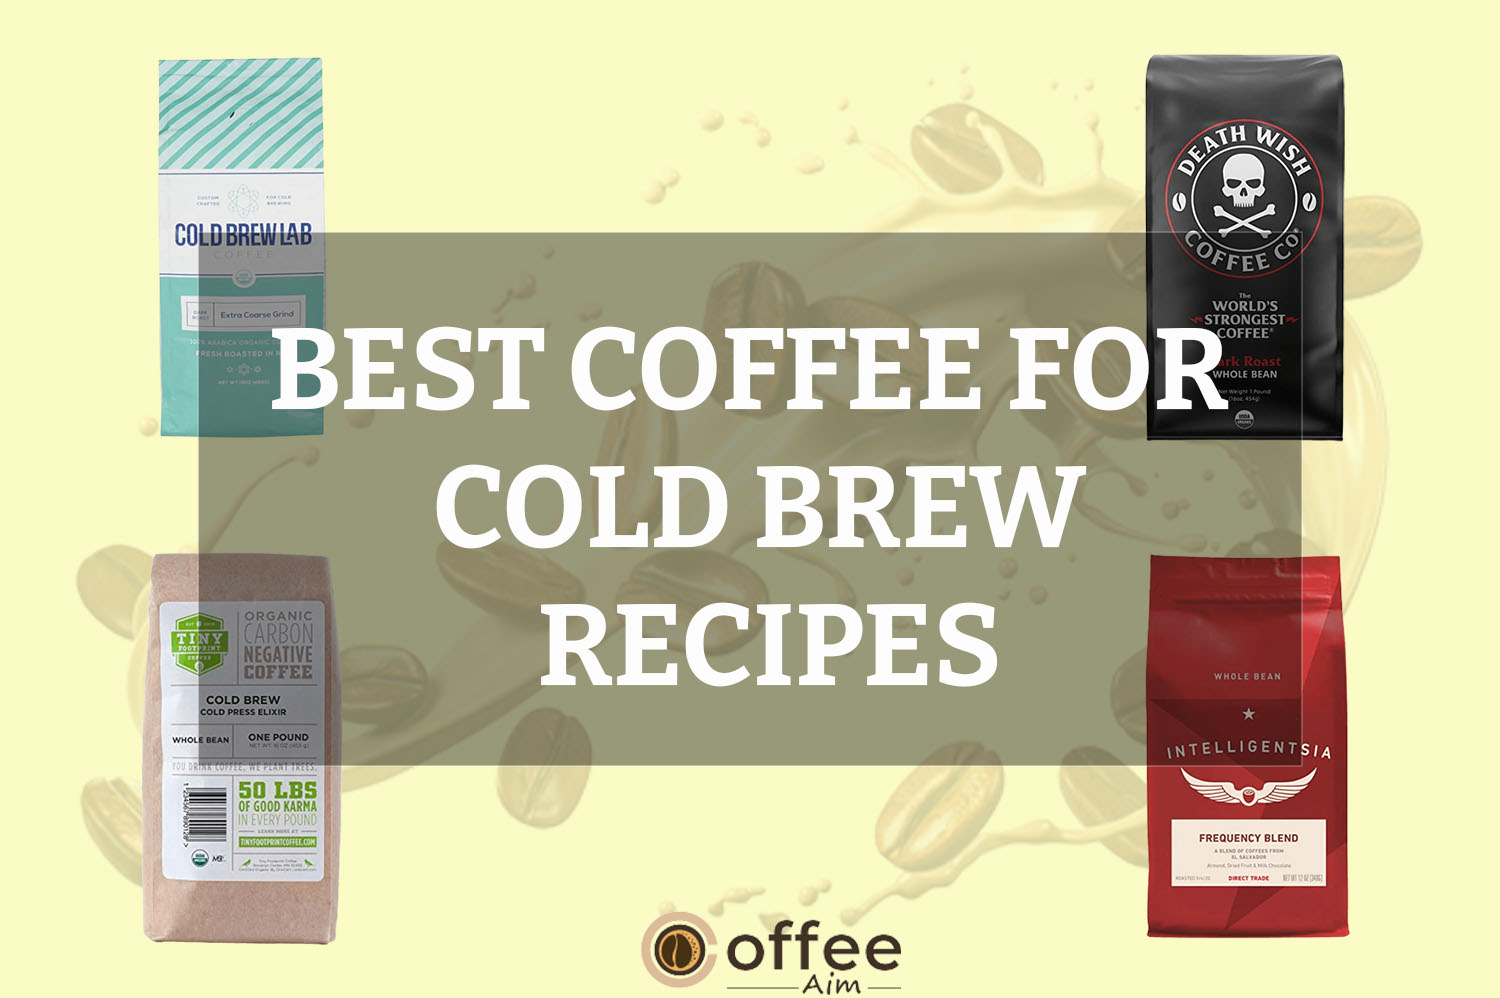 Best-Coffee-For-Cold-Brew-Recipes